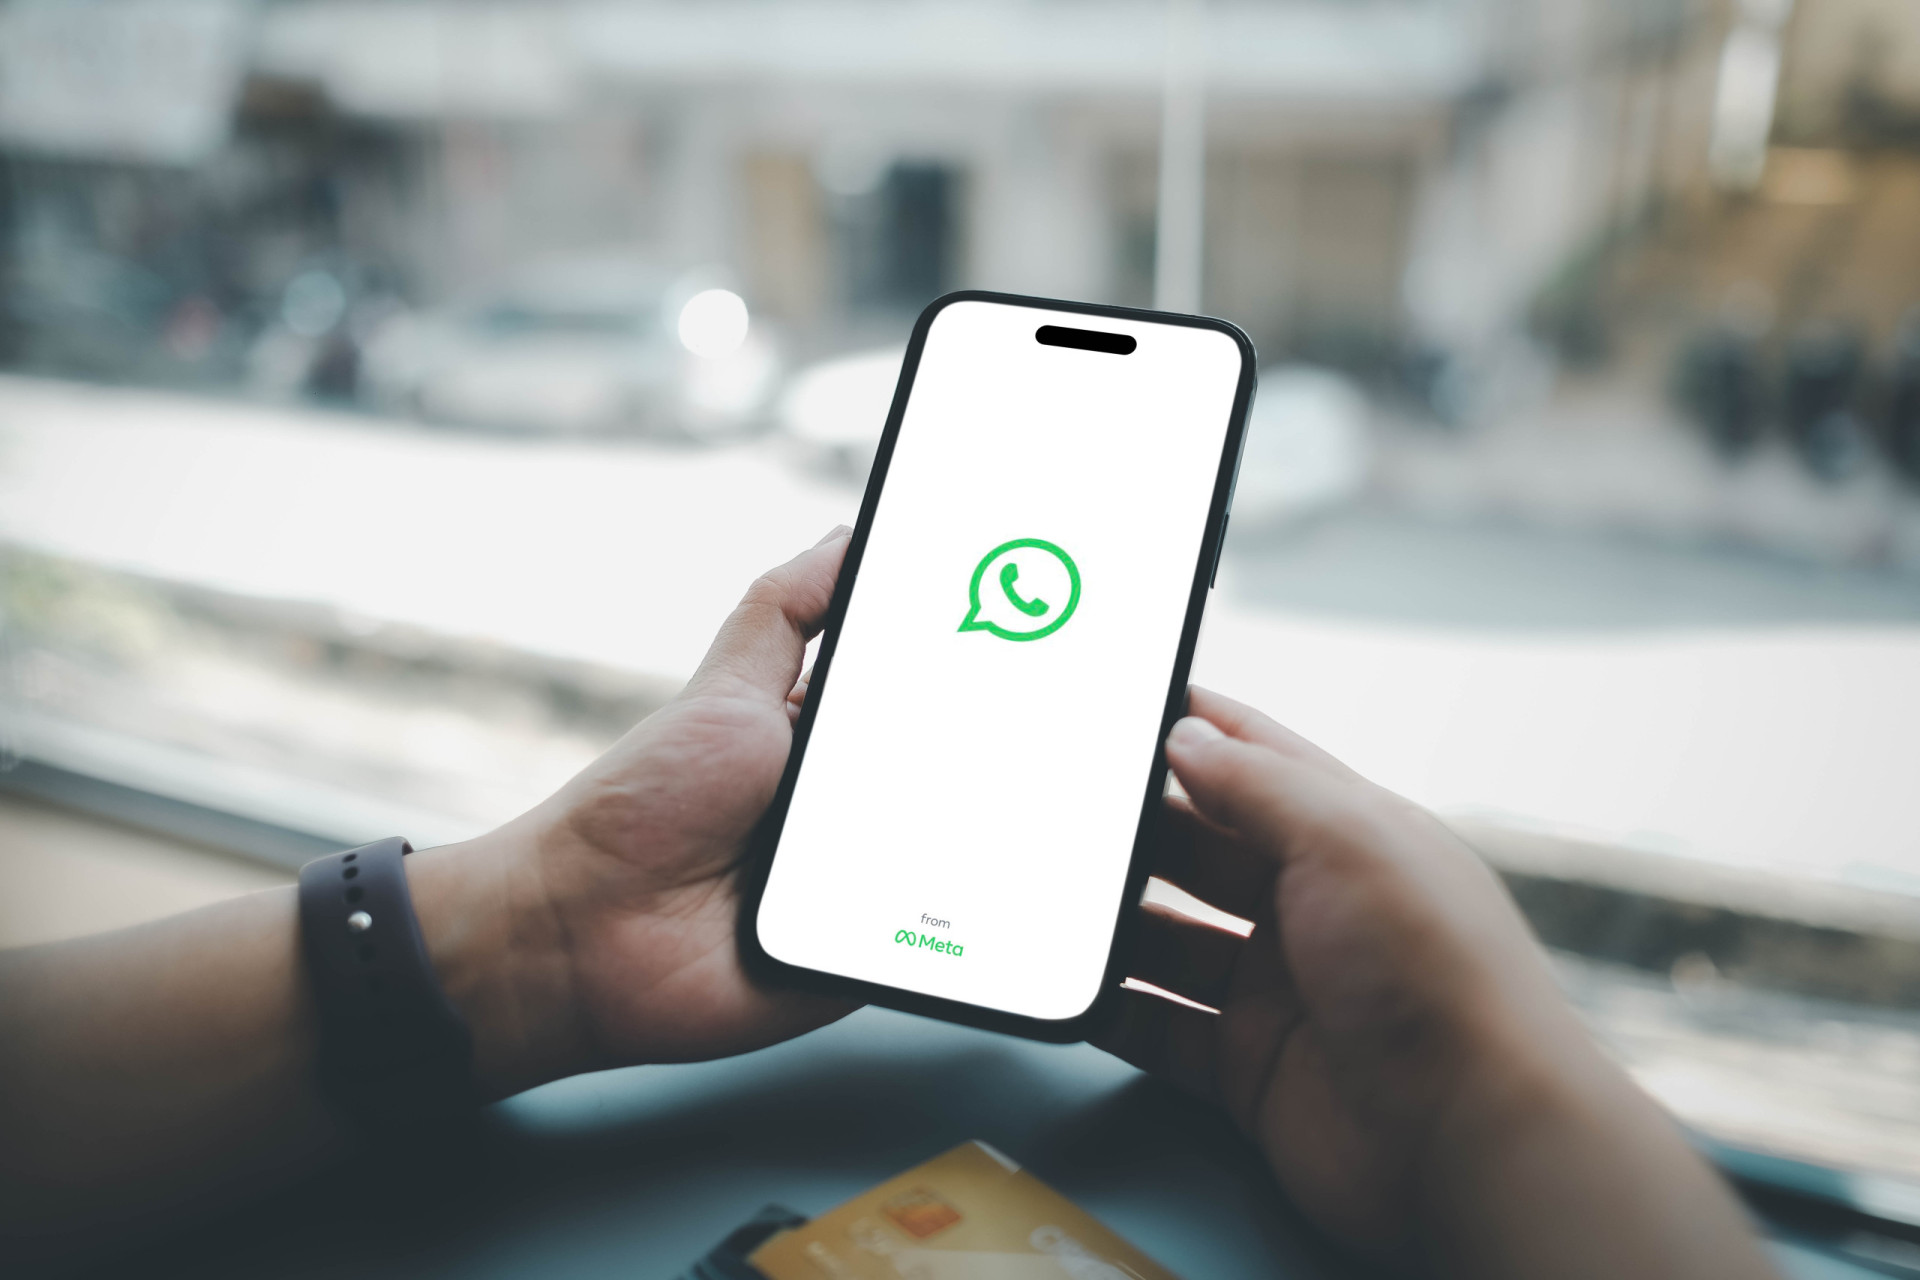 <p>Thanks to the technology of today, there are so many options to help you stay connected to friends and family back in the US. Whether it's a Zoom call or messaging through WhatsApp, your loved ones are always near.</p><p>You may also like:<a href="https://www.starsinsider.com/n/463541?utm_source=msn.com&utm_medium=display&utm_campaign=referral_description&utm_content=706181en-us"> What was the average diet like in medieval Europe?</a></p>